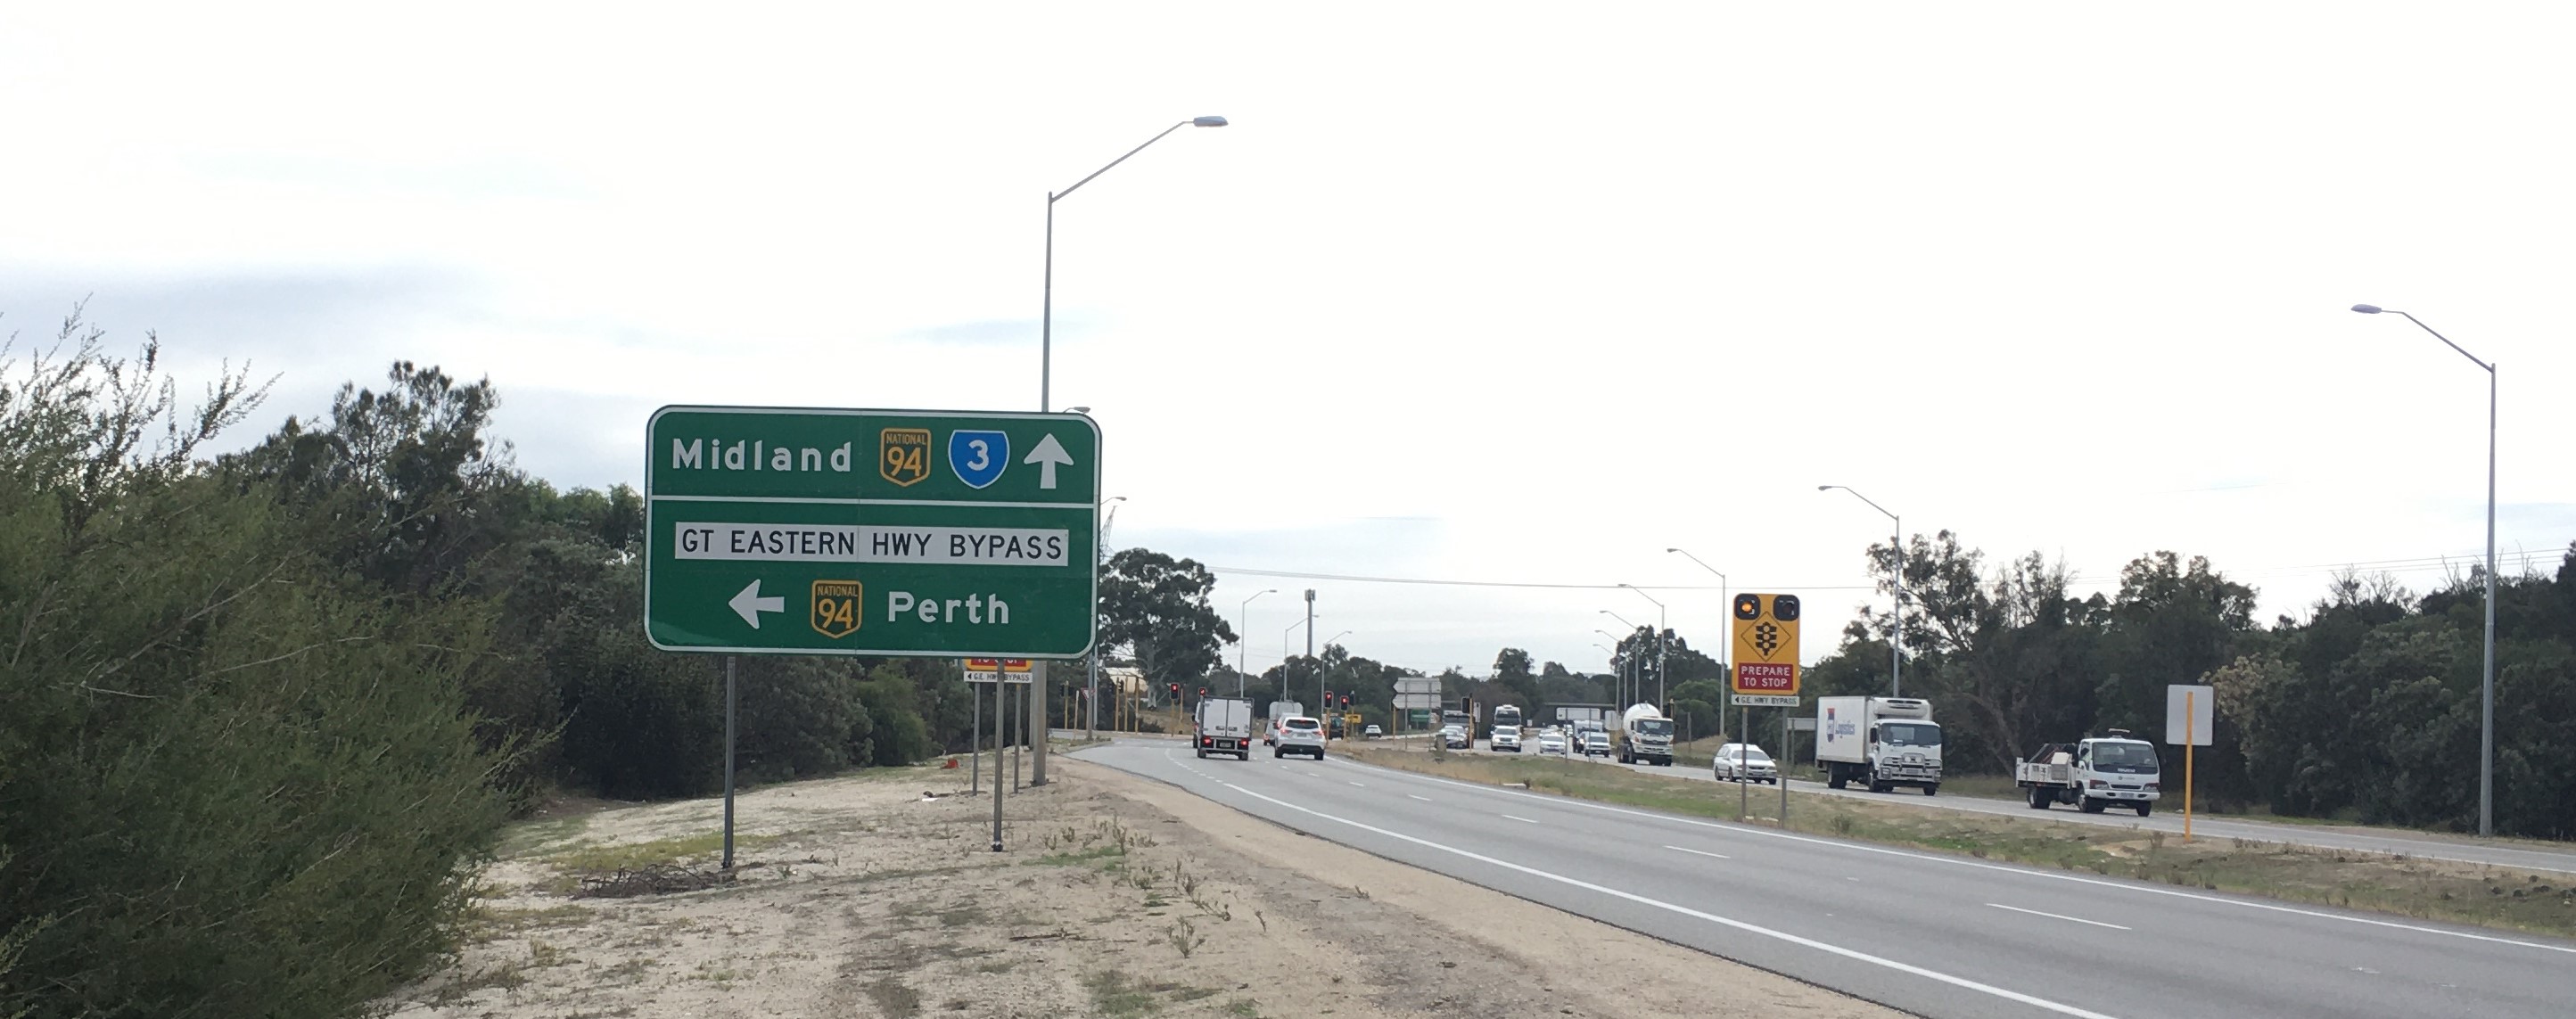 Intersection at Roe Highway and GEH Bypass